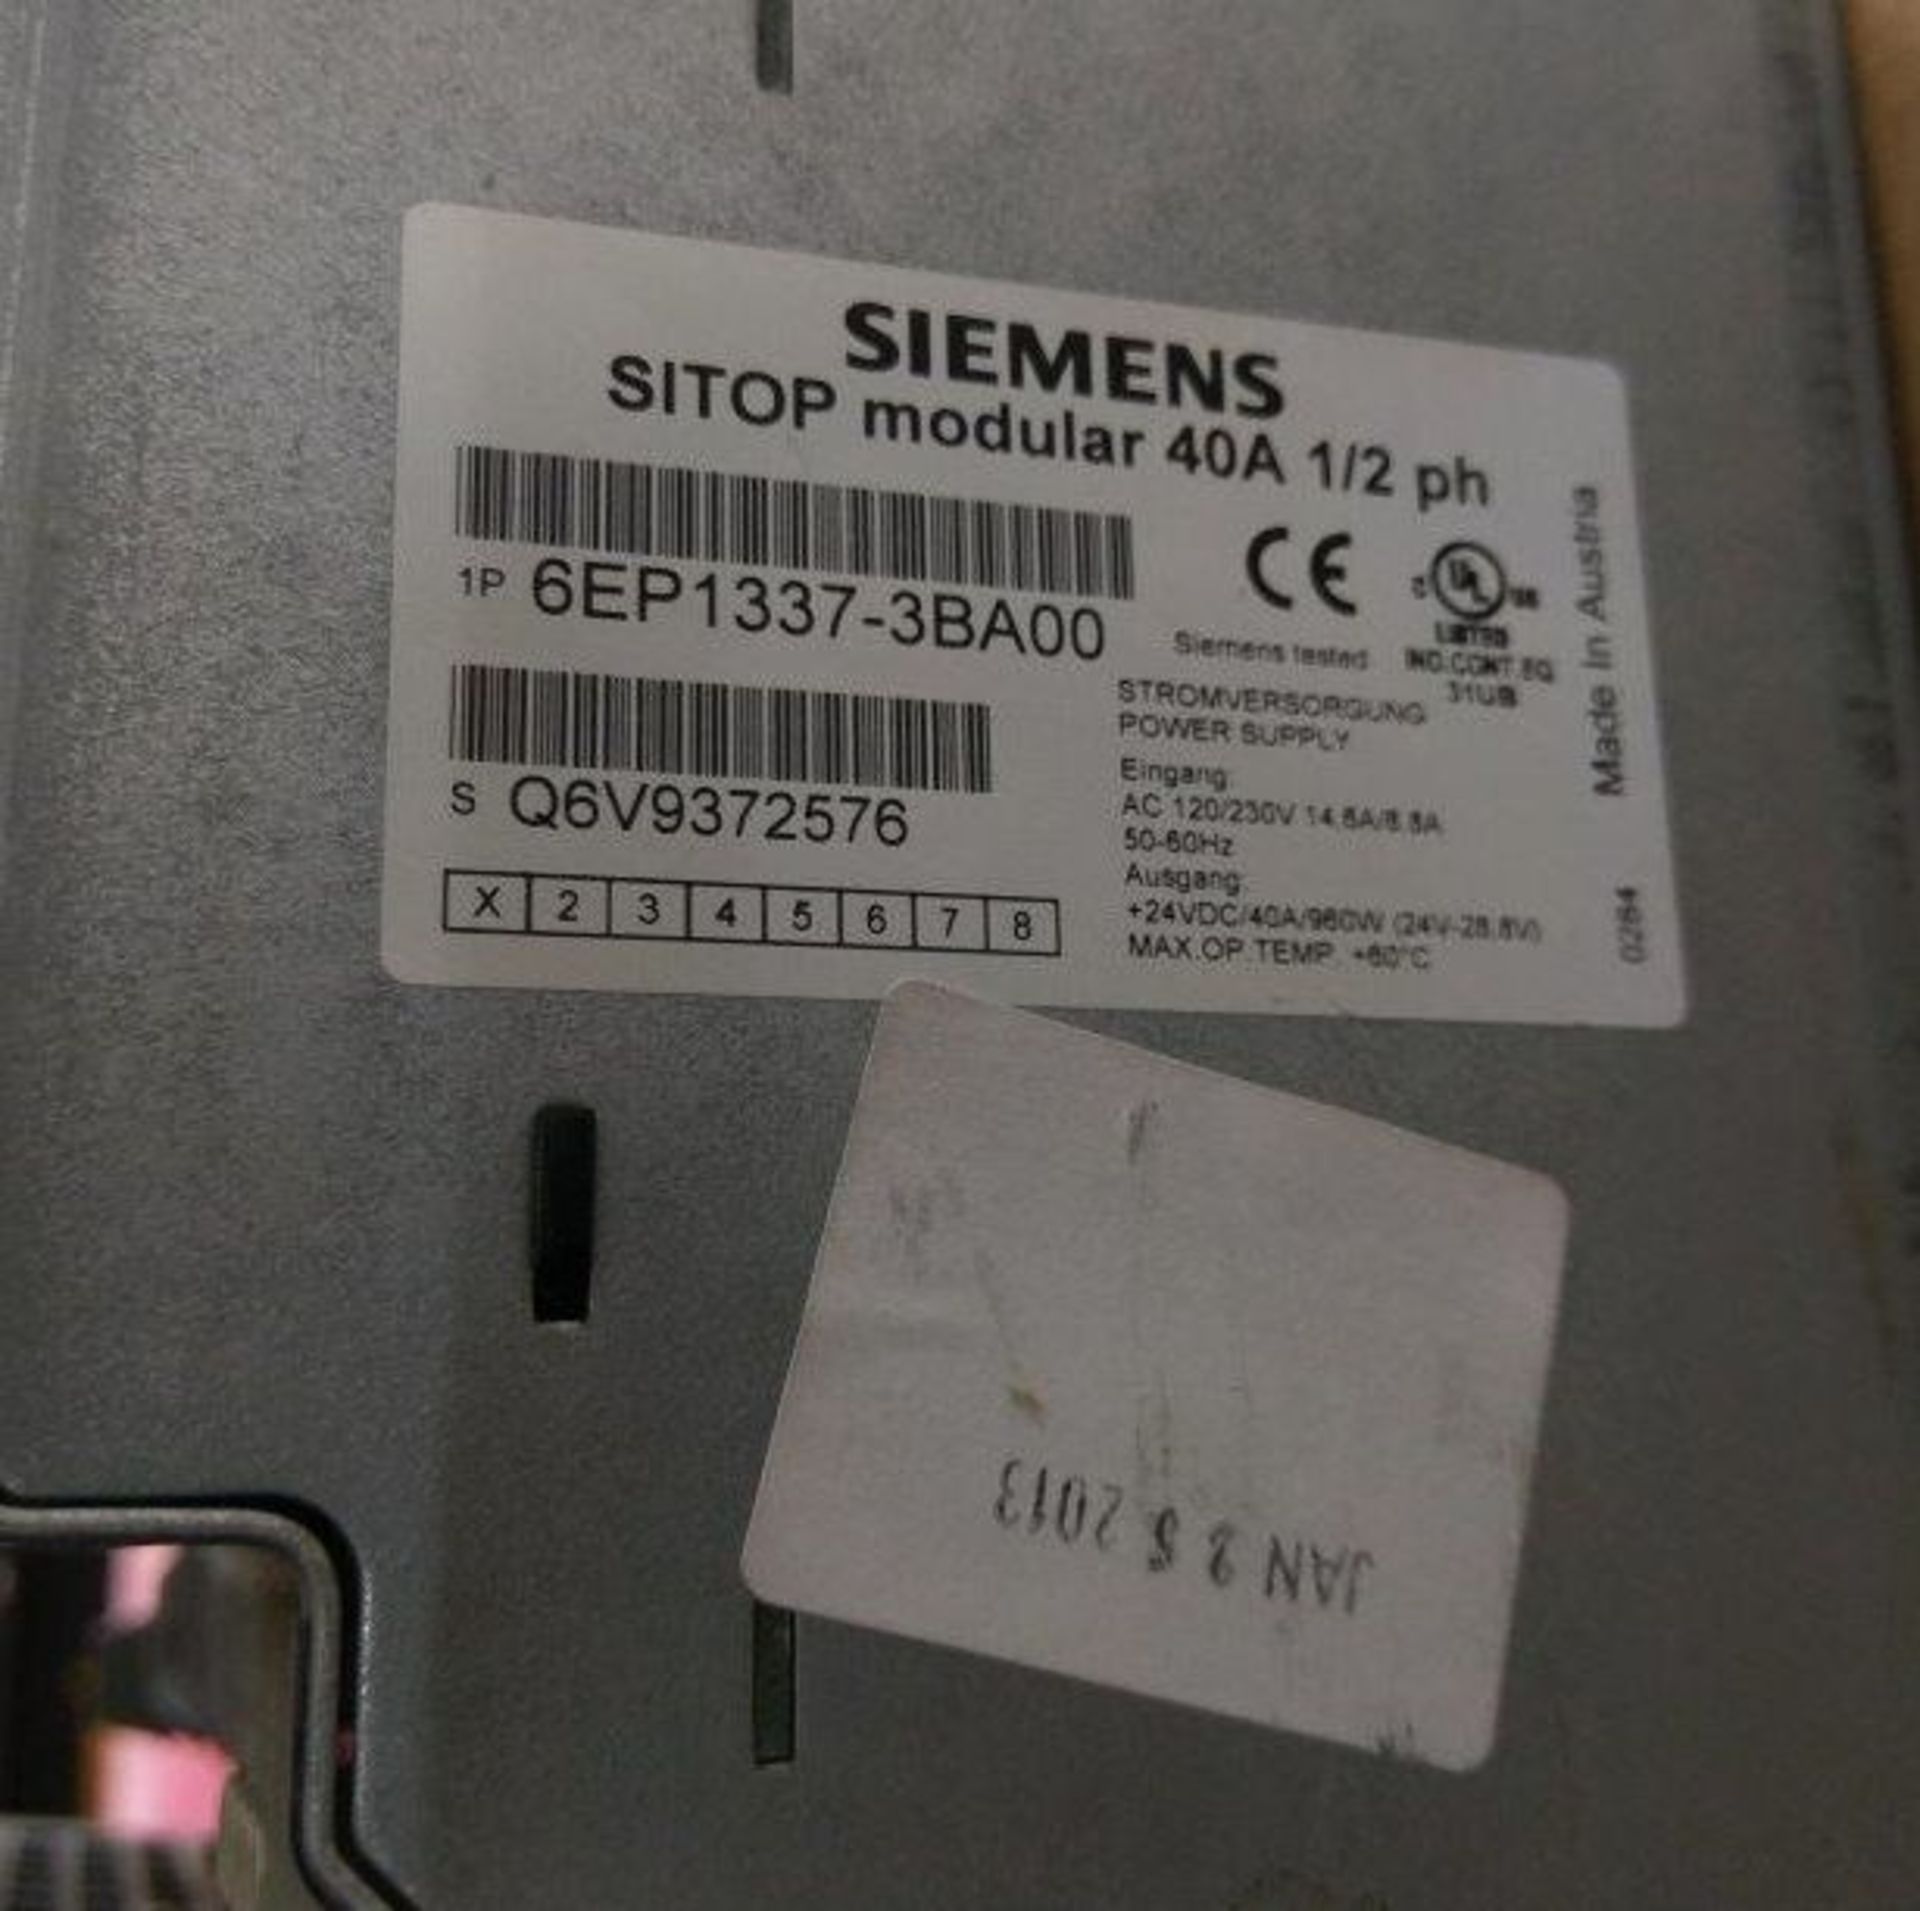 Lot of 5 Siemens SITOP Power Supply Model 1P 6EP1337-3BA00 - Image 3 of 3